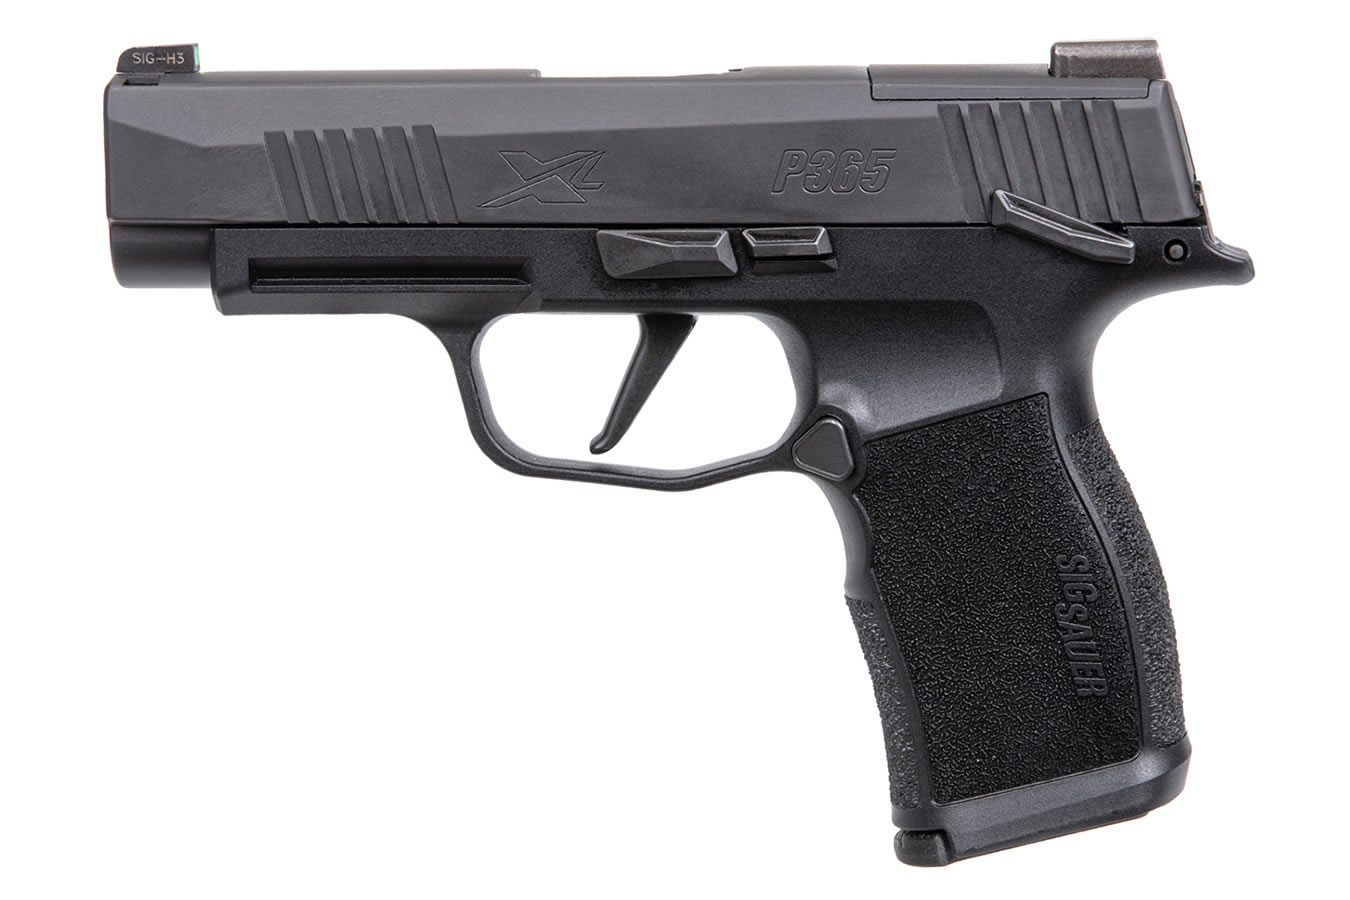 P365 XL 9MM SEMI-AUTOMATIC PISTOL WITH MANUAL SAFETY